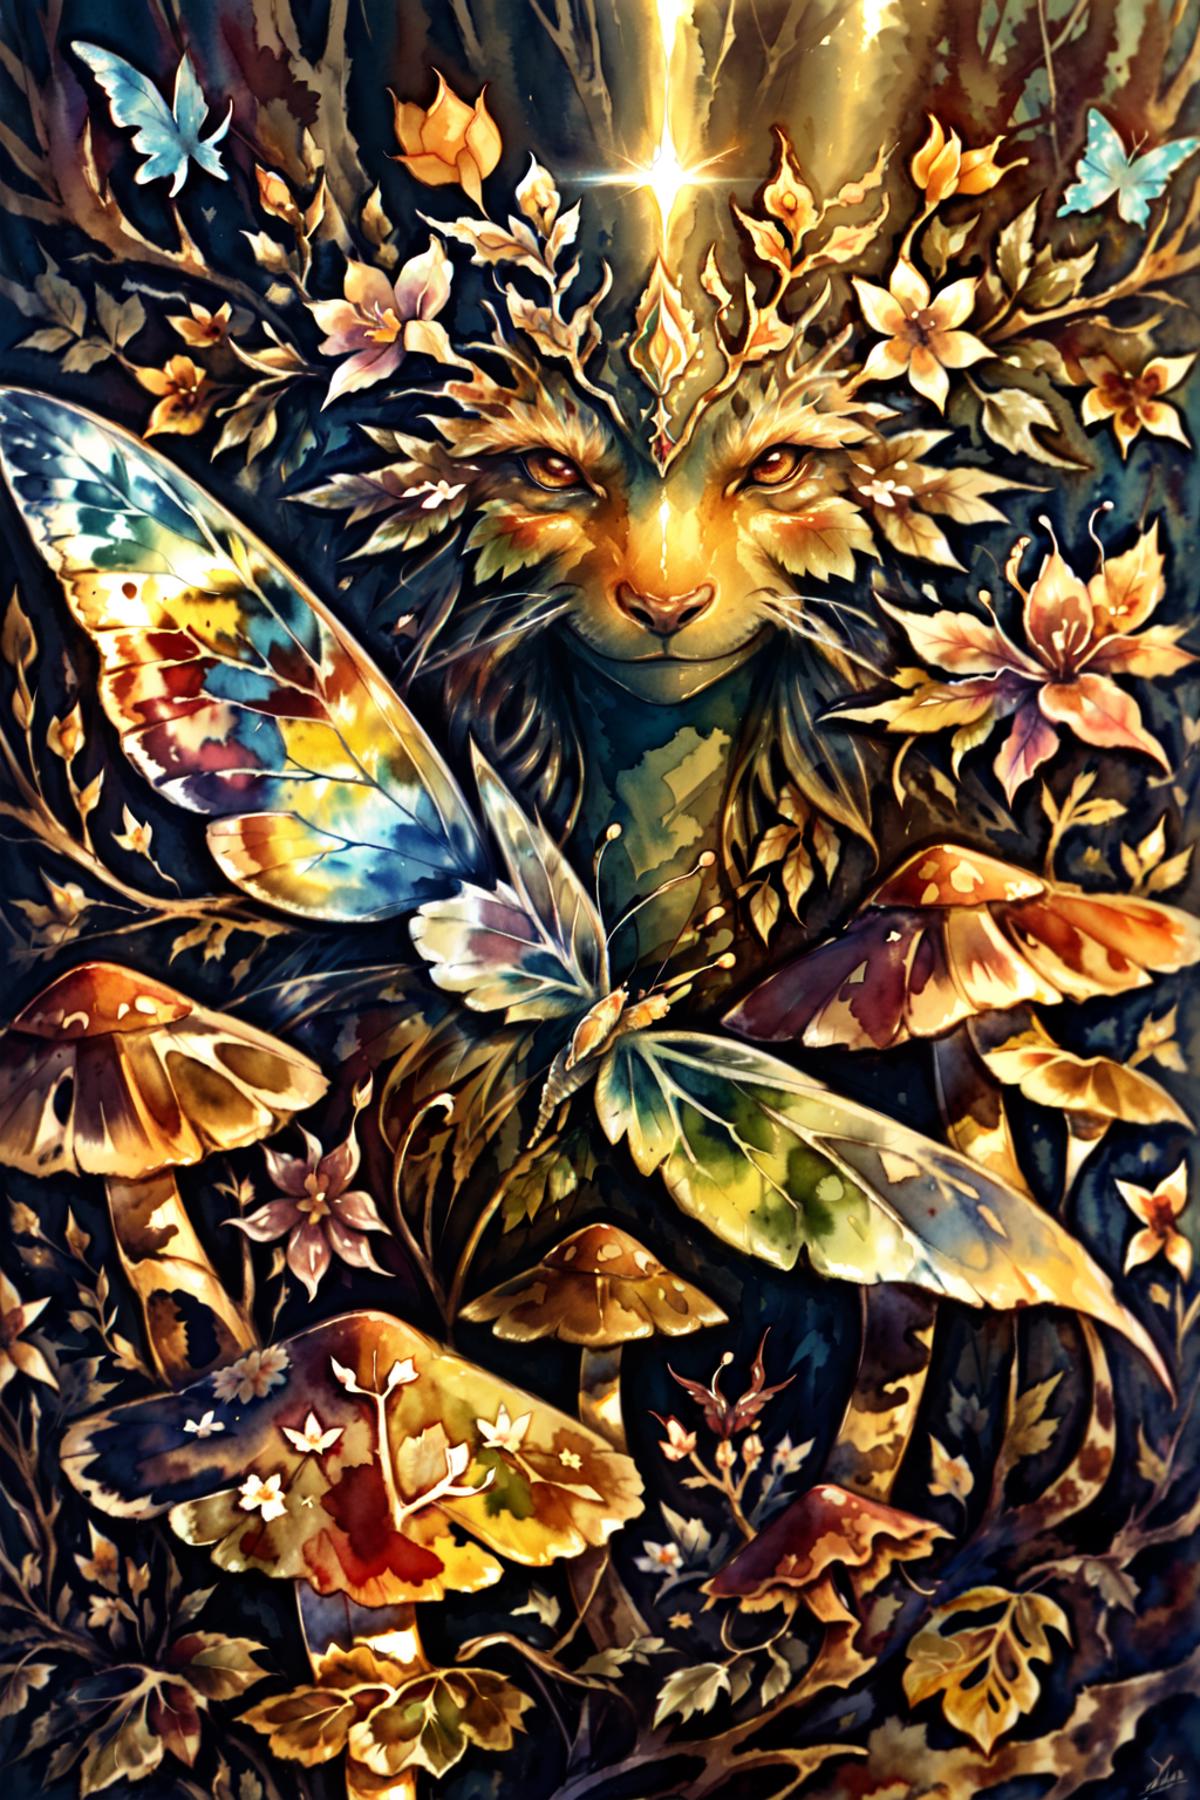 Faeries and forest creatures - Brian Froud style image by NostalgiaForever